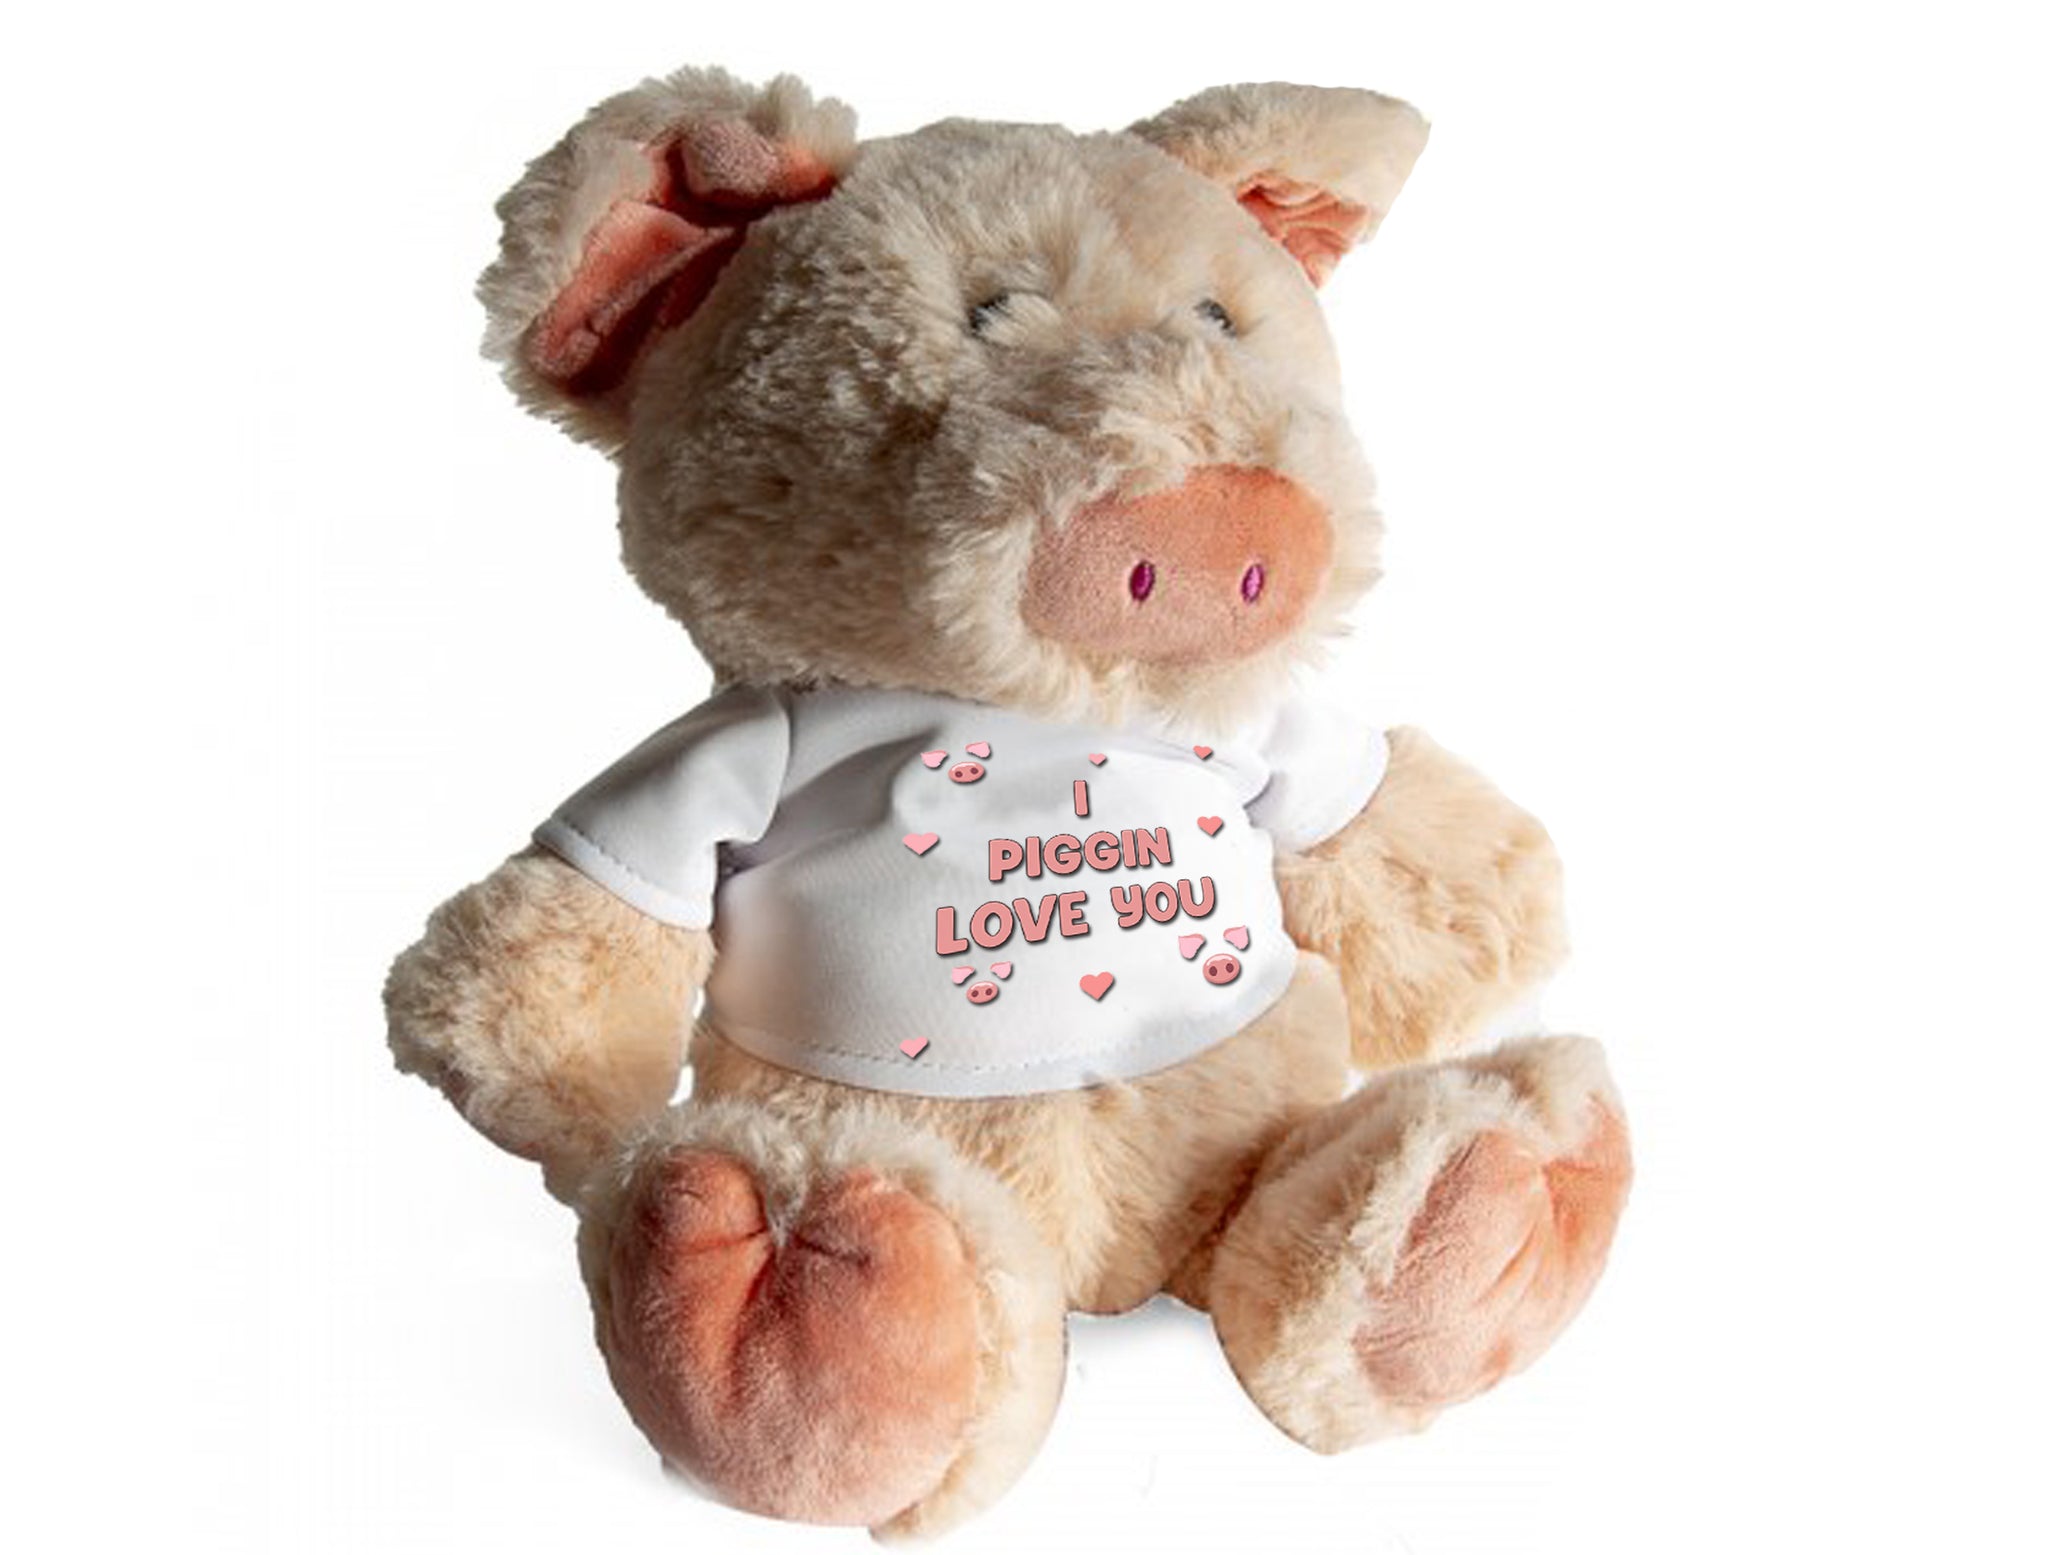 PERSONALISED I Pigging Love you Stuffed PIG Teddy with T-Shirt